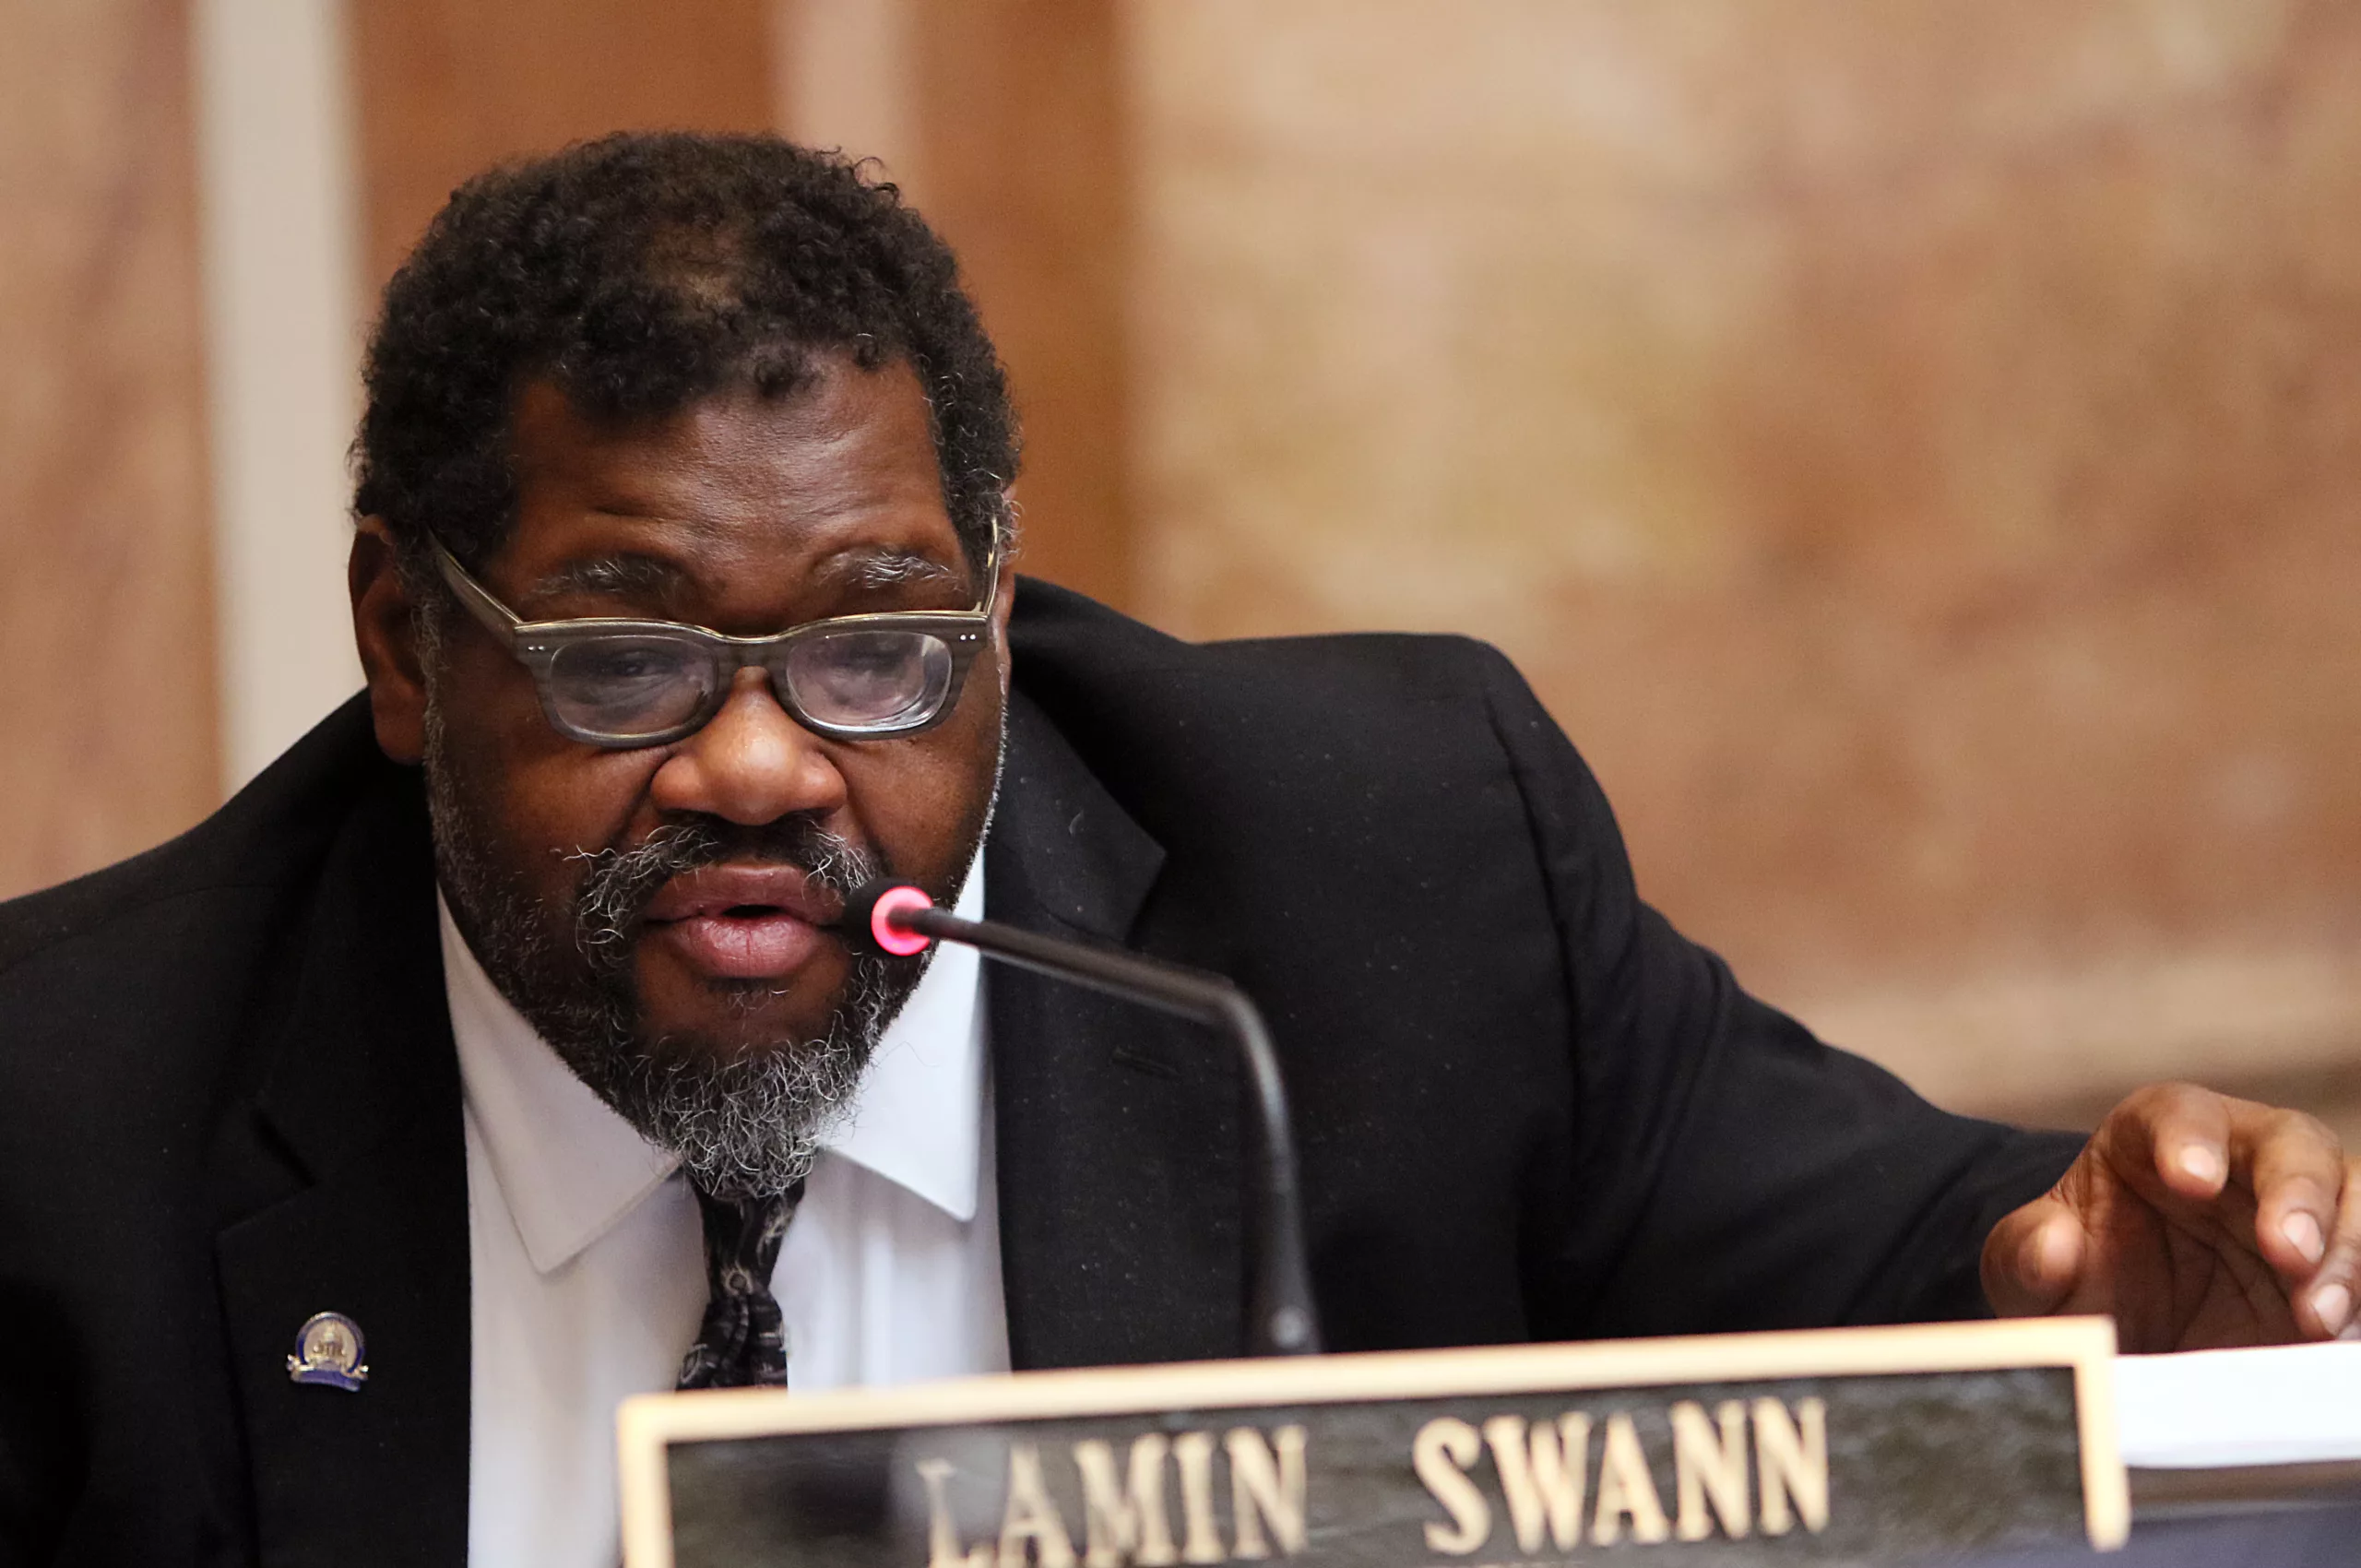 Rep. Lamin Swann dies after ‘significant medical emergency’